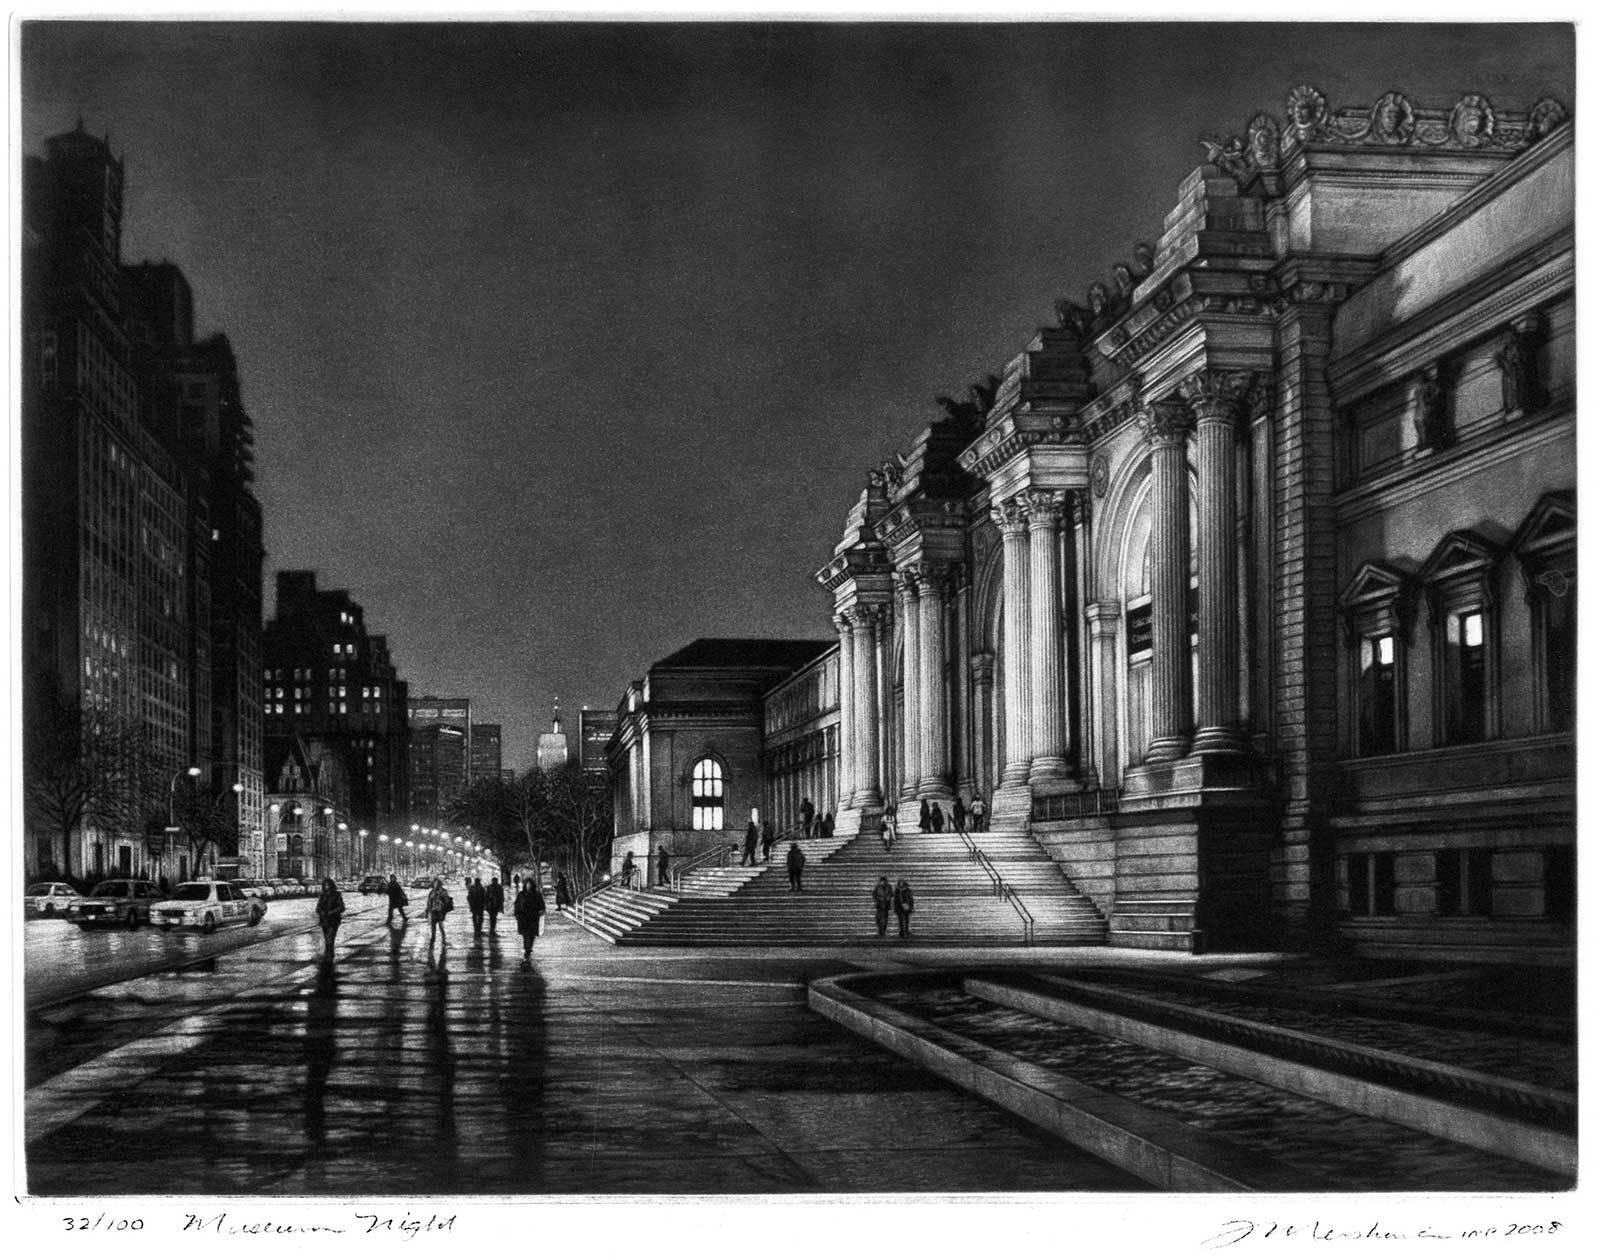 Museum Night (a night view of life on Fifth Ave by NYC's Metropolitan Museum) - Contemporary Print by Frederick Mershimer